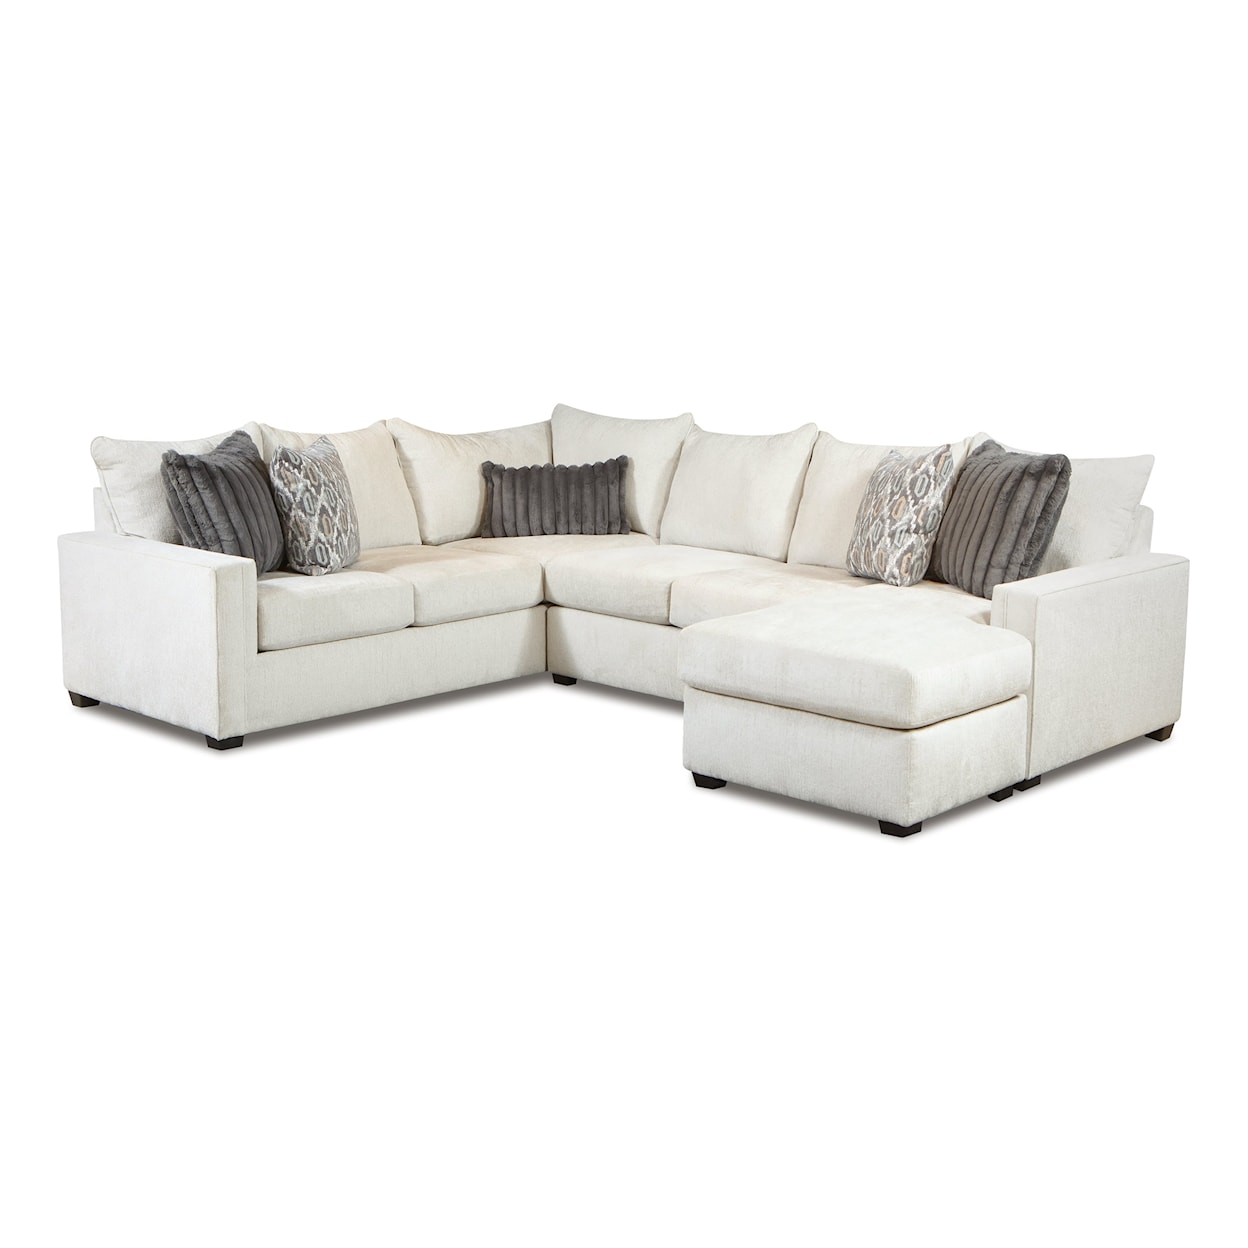 Behold Home 3590 Willett Stone 2-Piece Sectional Sofa